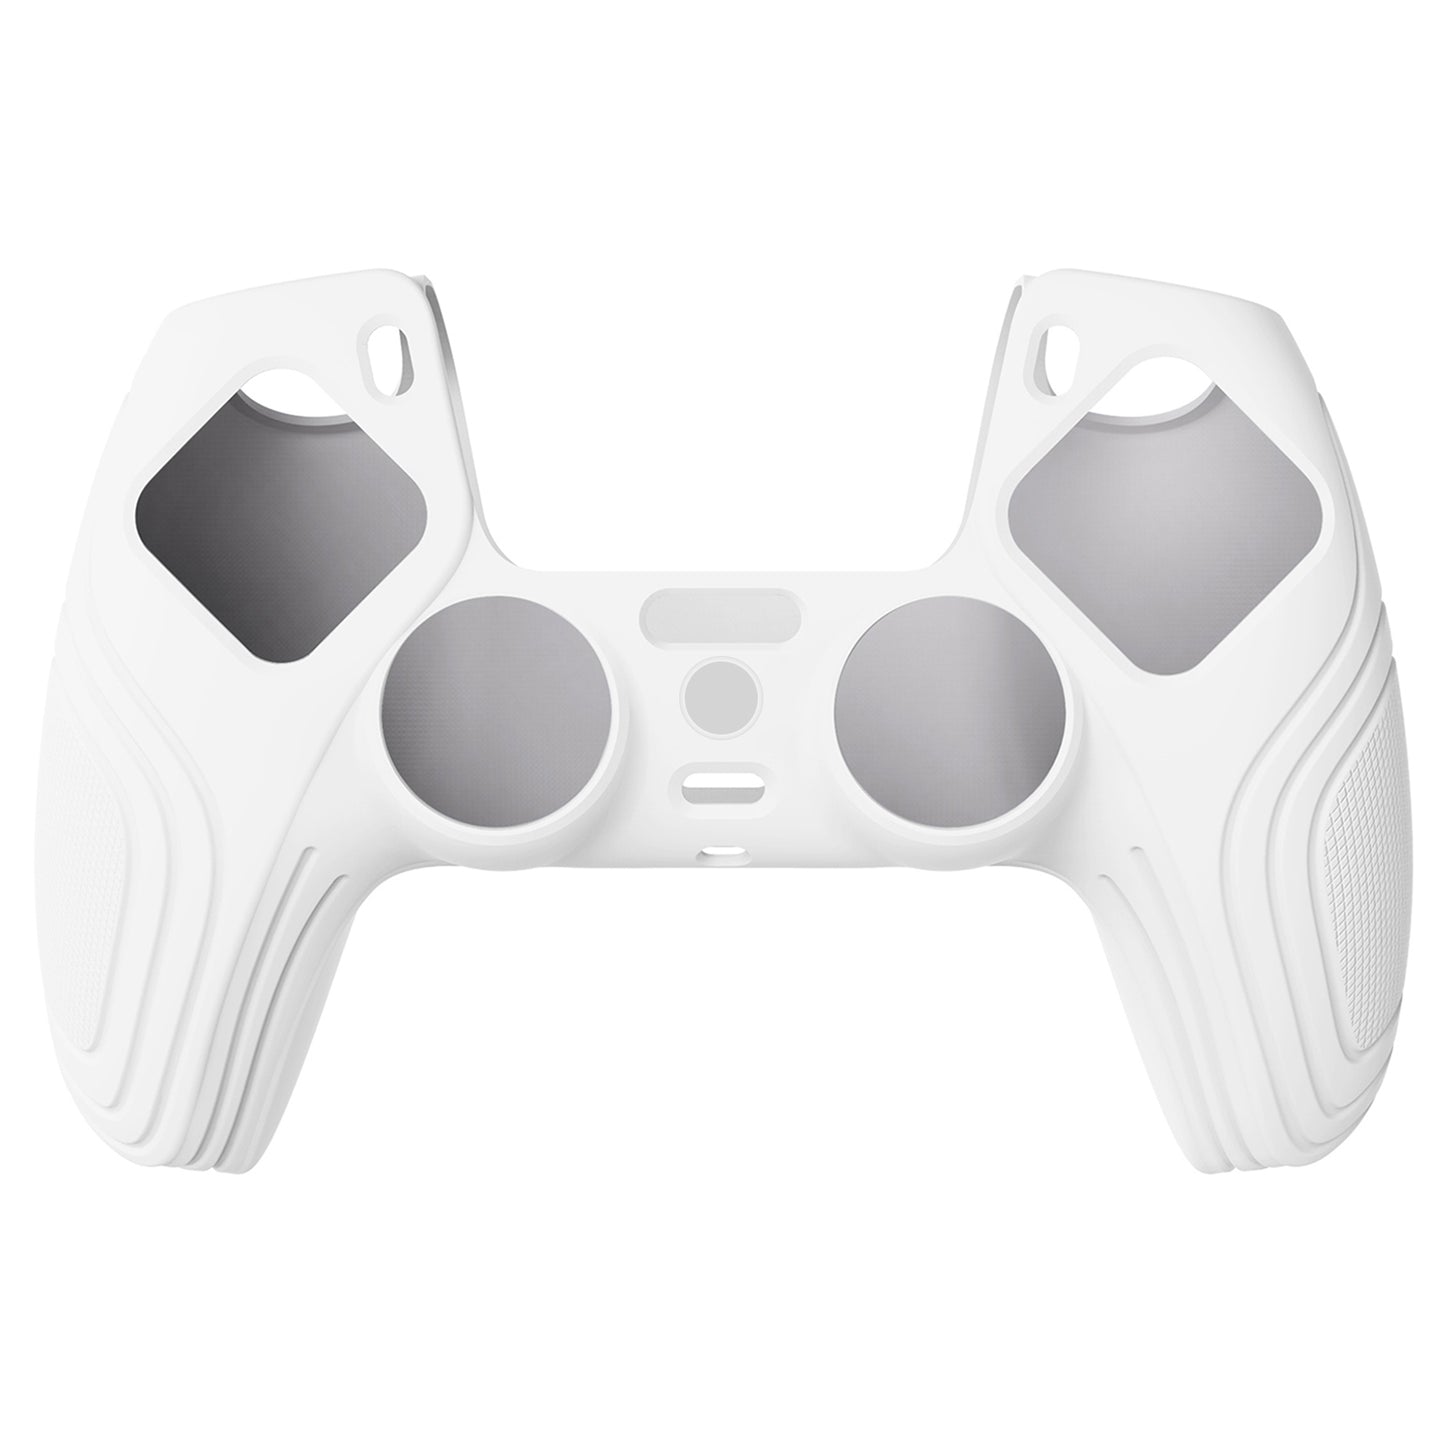 PlayVital Samurai Edition Anti-Slip Silicone Cover Skin with Thumb Grip Caps for PS5 Wireless Controller - White - BWPF002 PlayVital